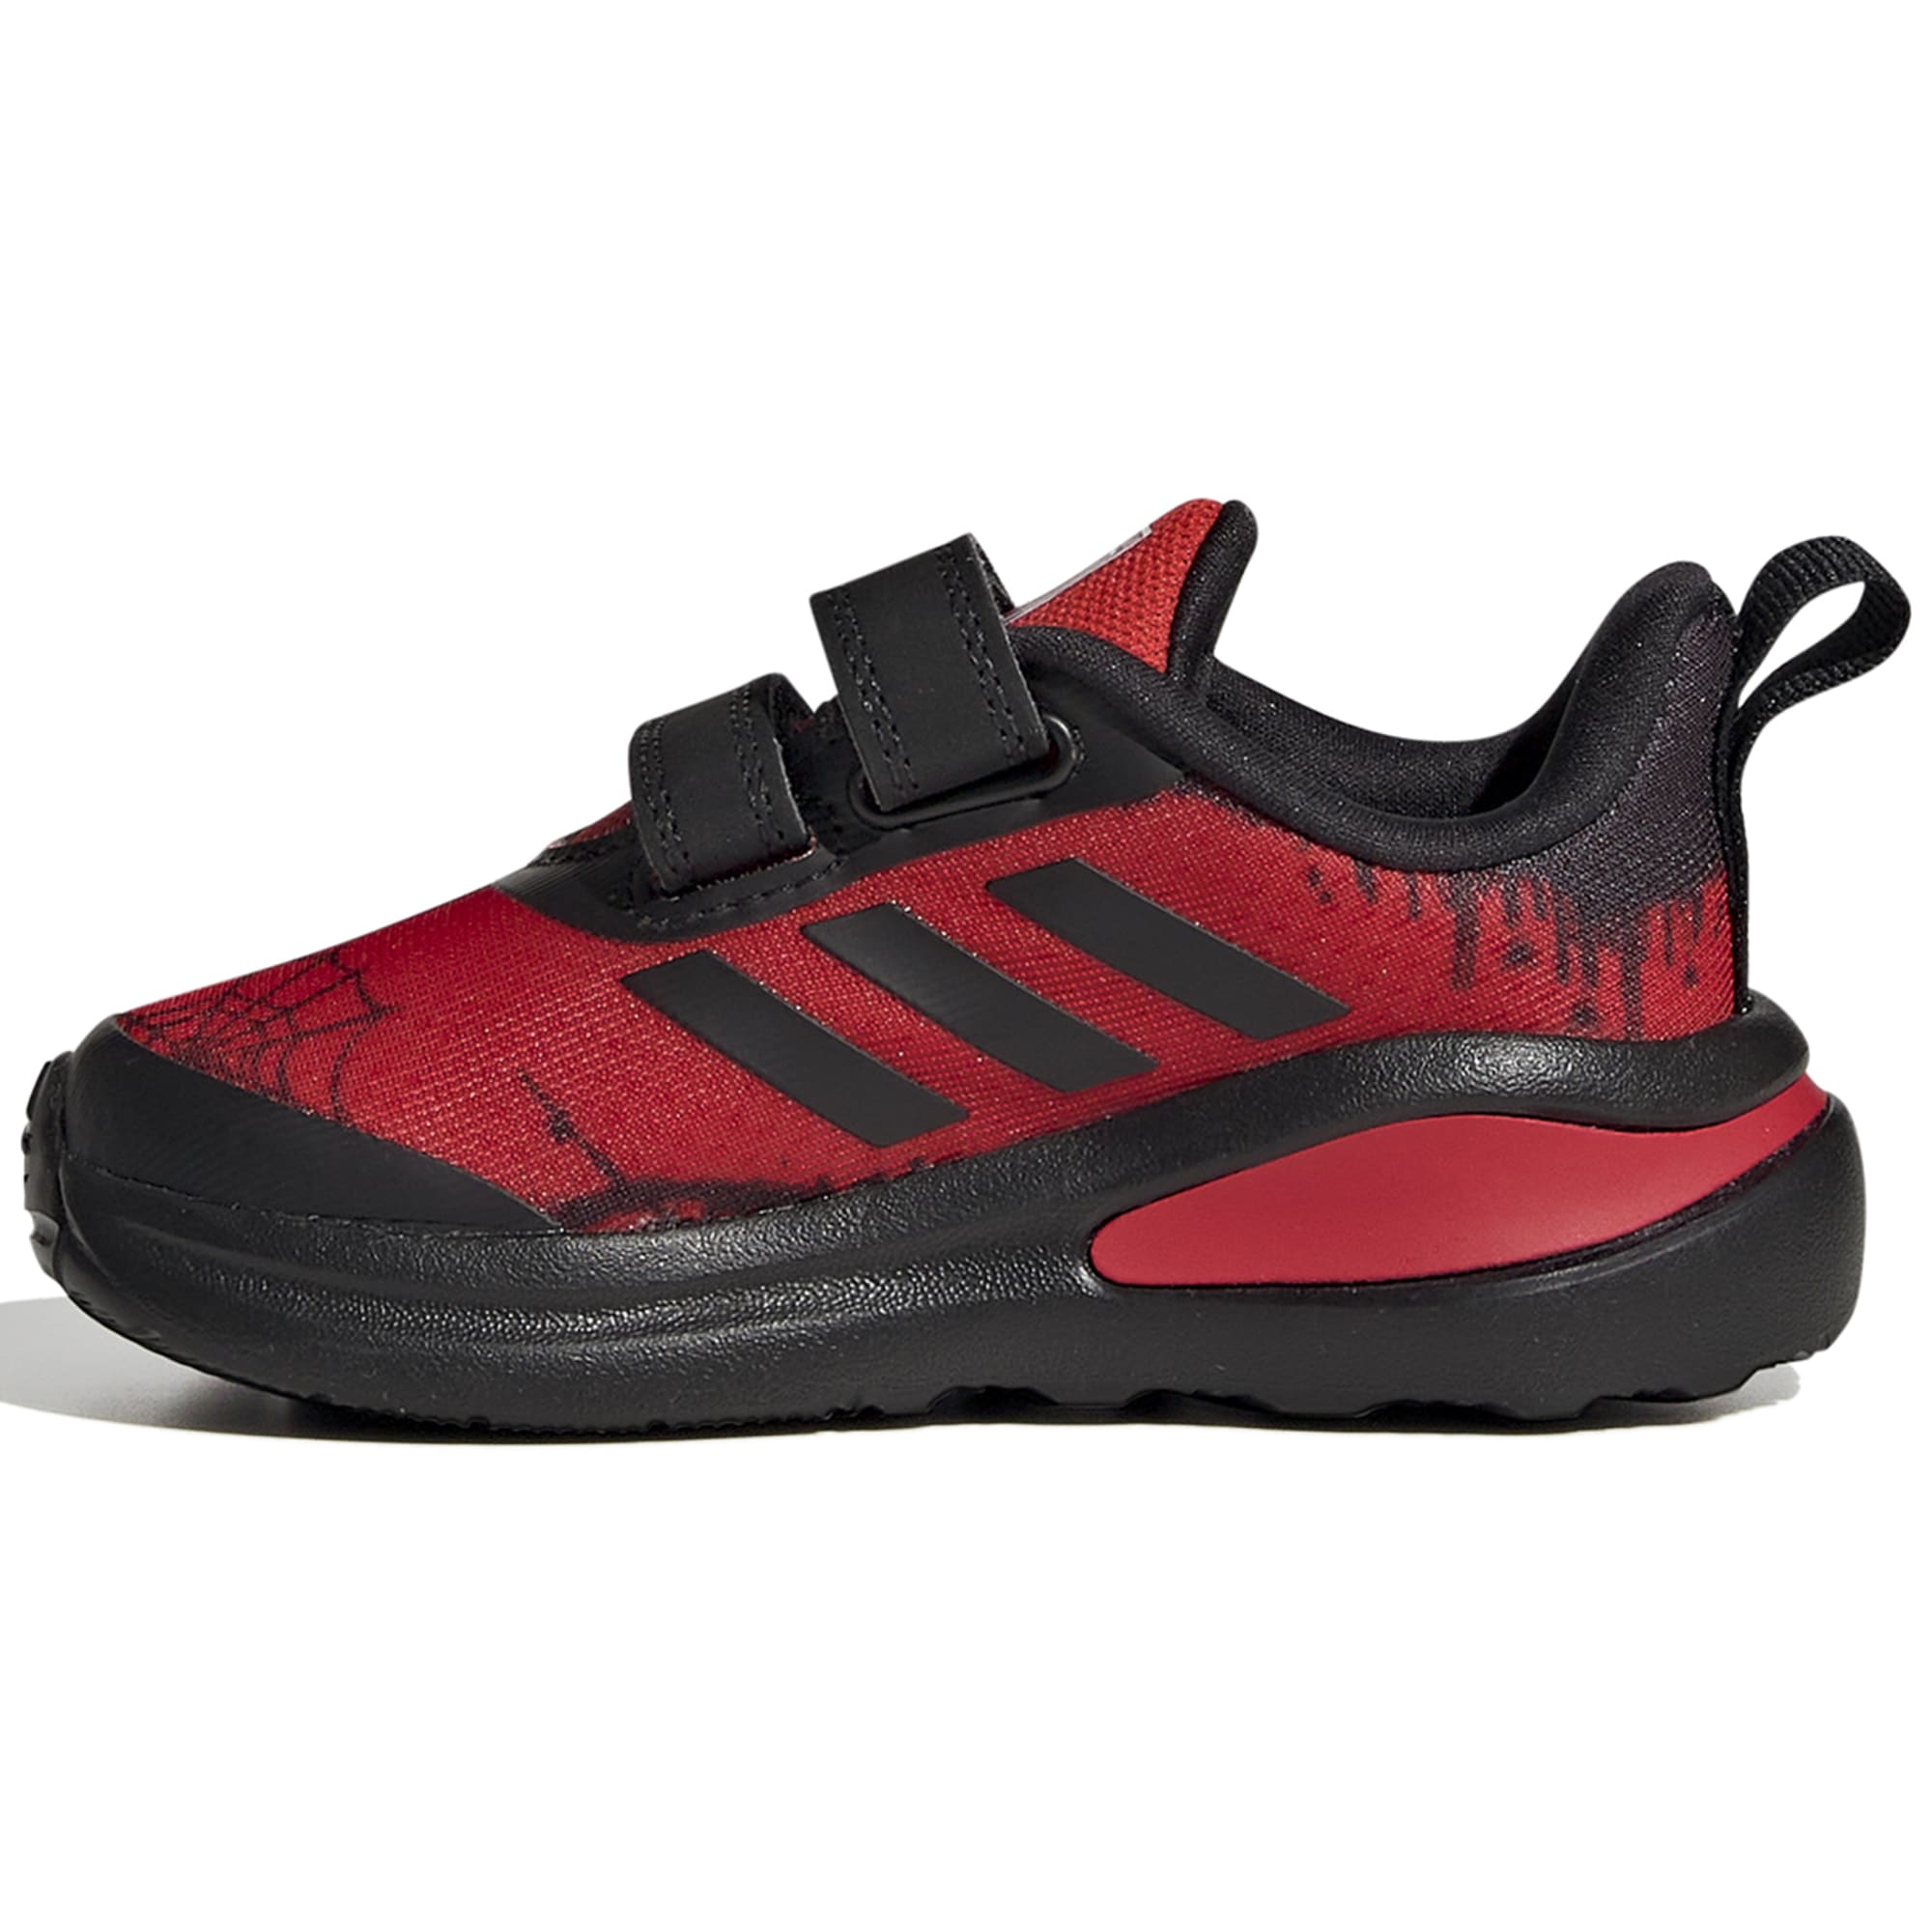 ADIDAS X Spider-Man Eastern Sports Marvel - Mountain Boys\' Infant/Toddler Fortarun Shoes